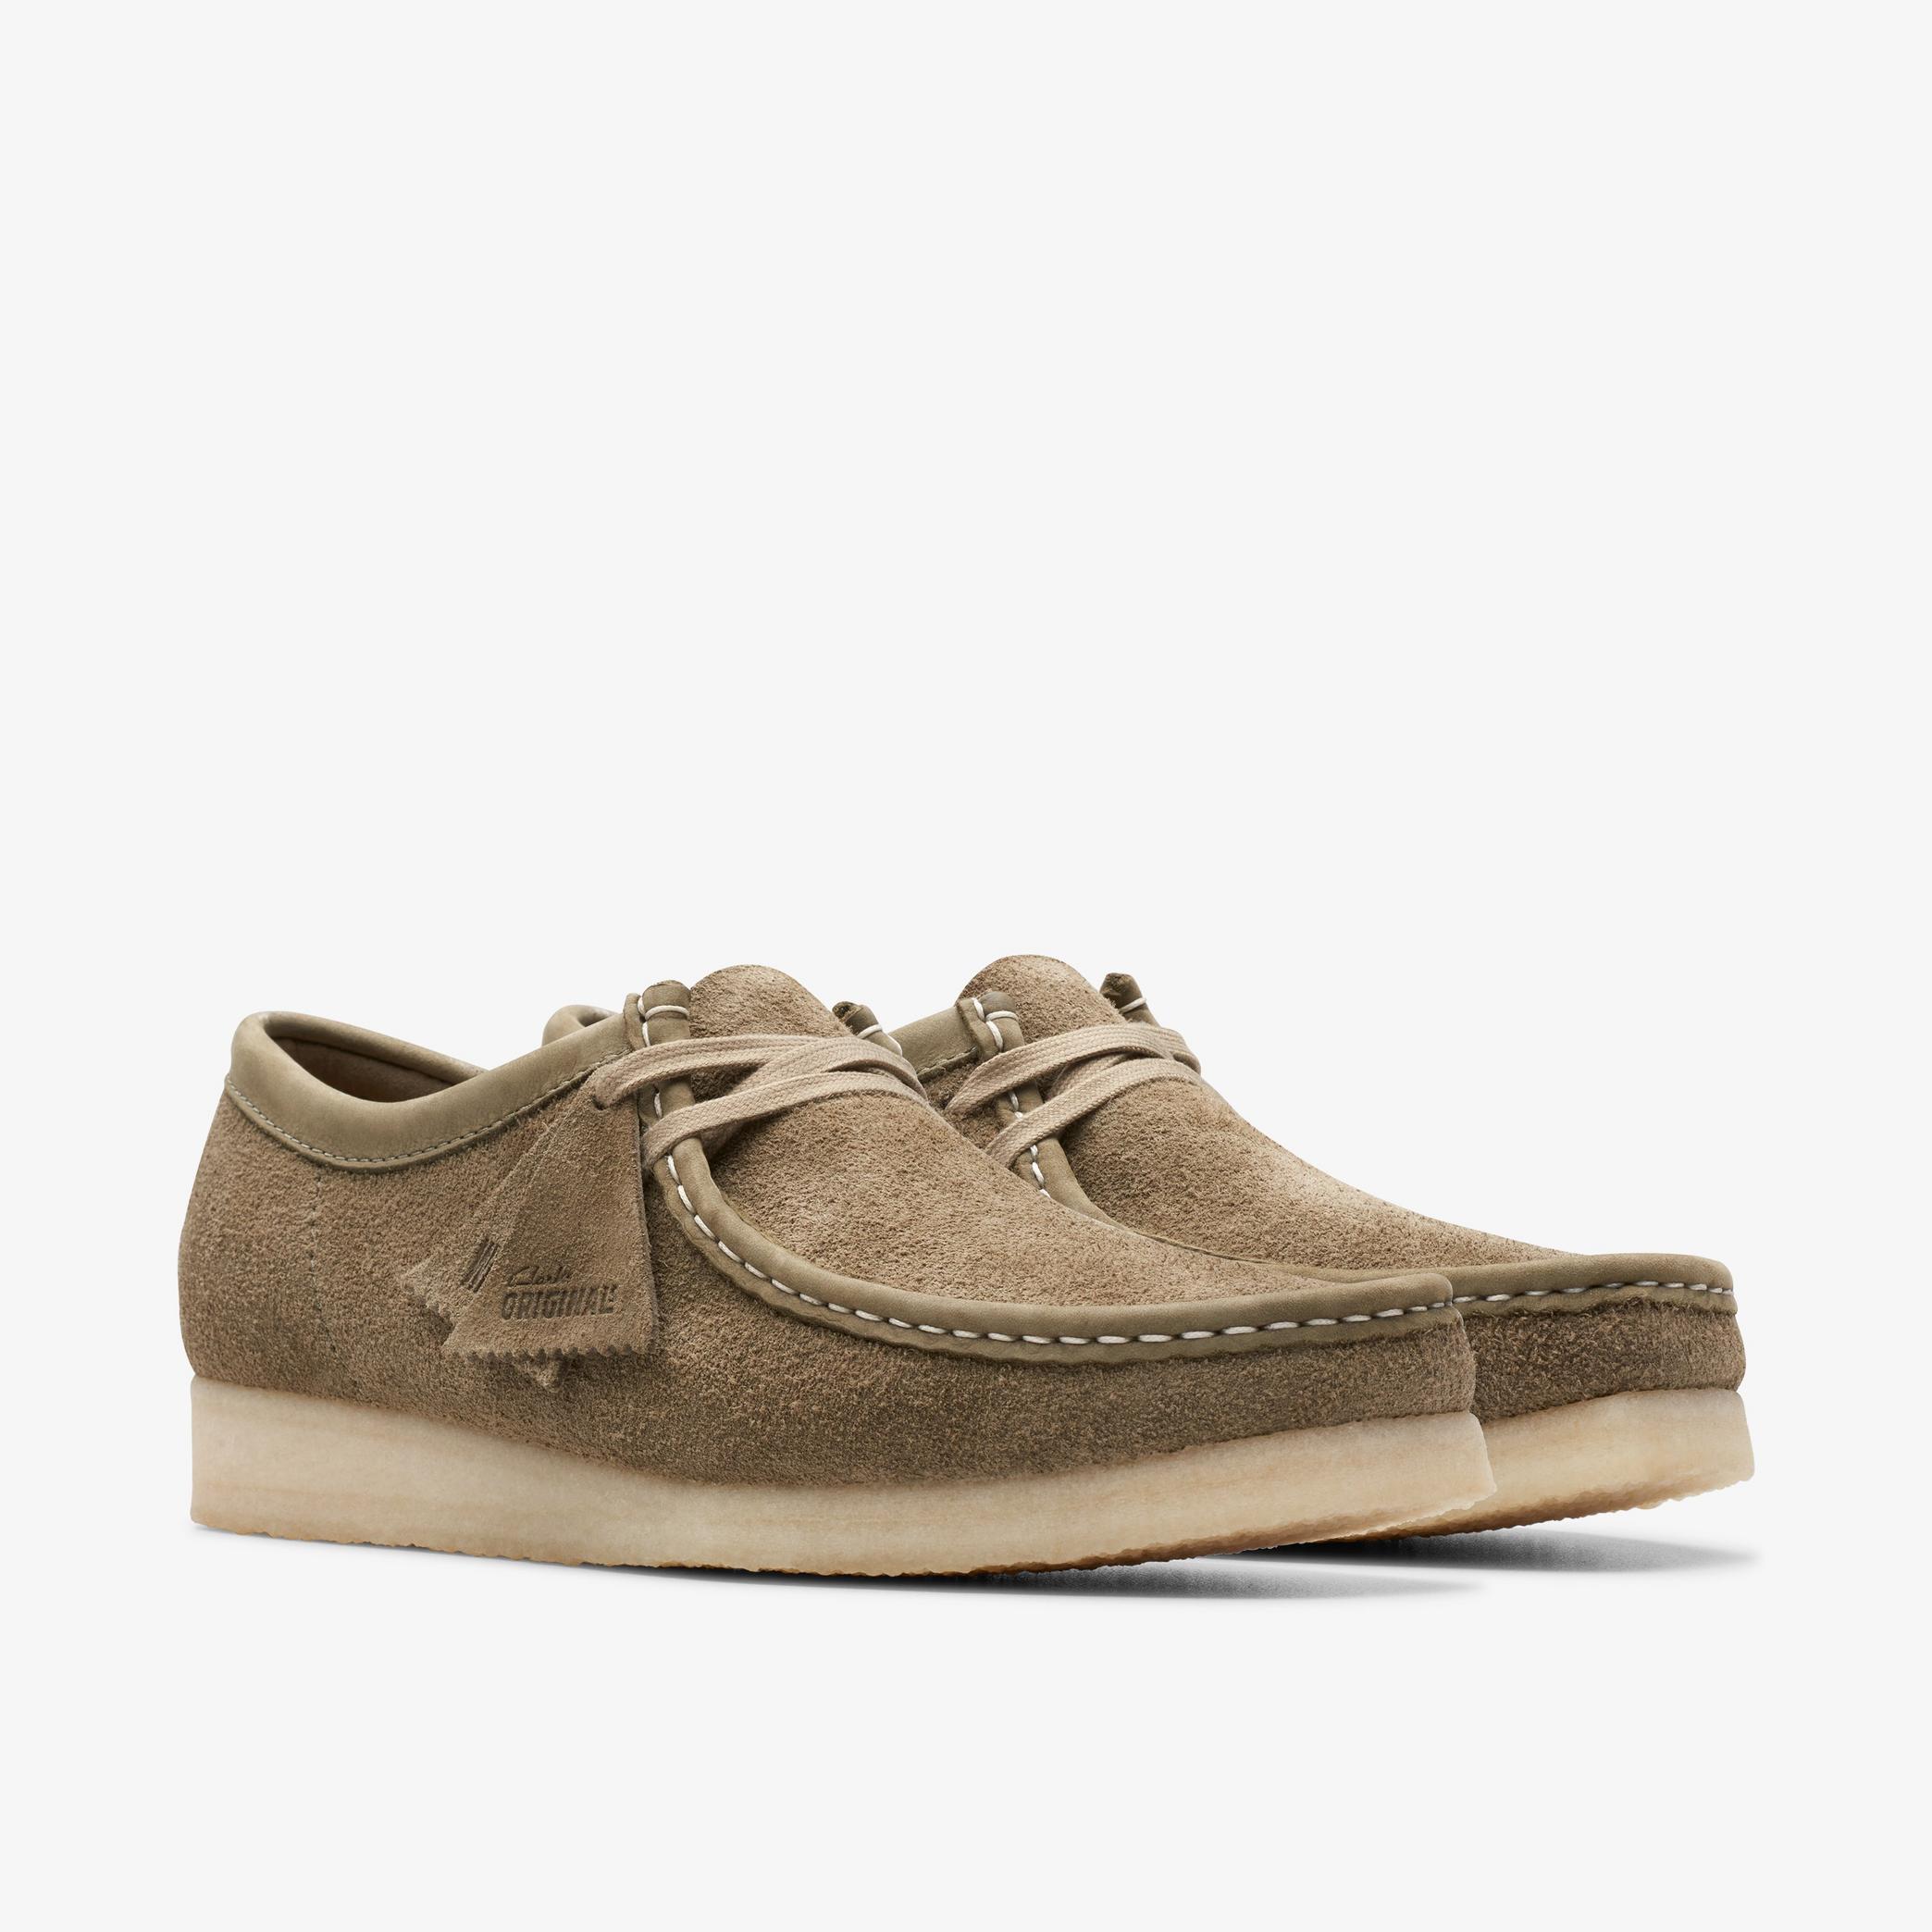 Wallabee Pale Khaki Suede Wallabee, view 4 of 7